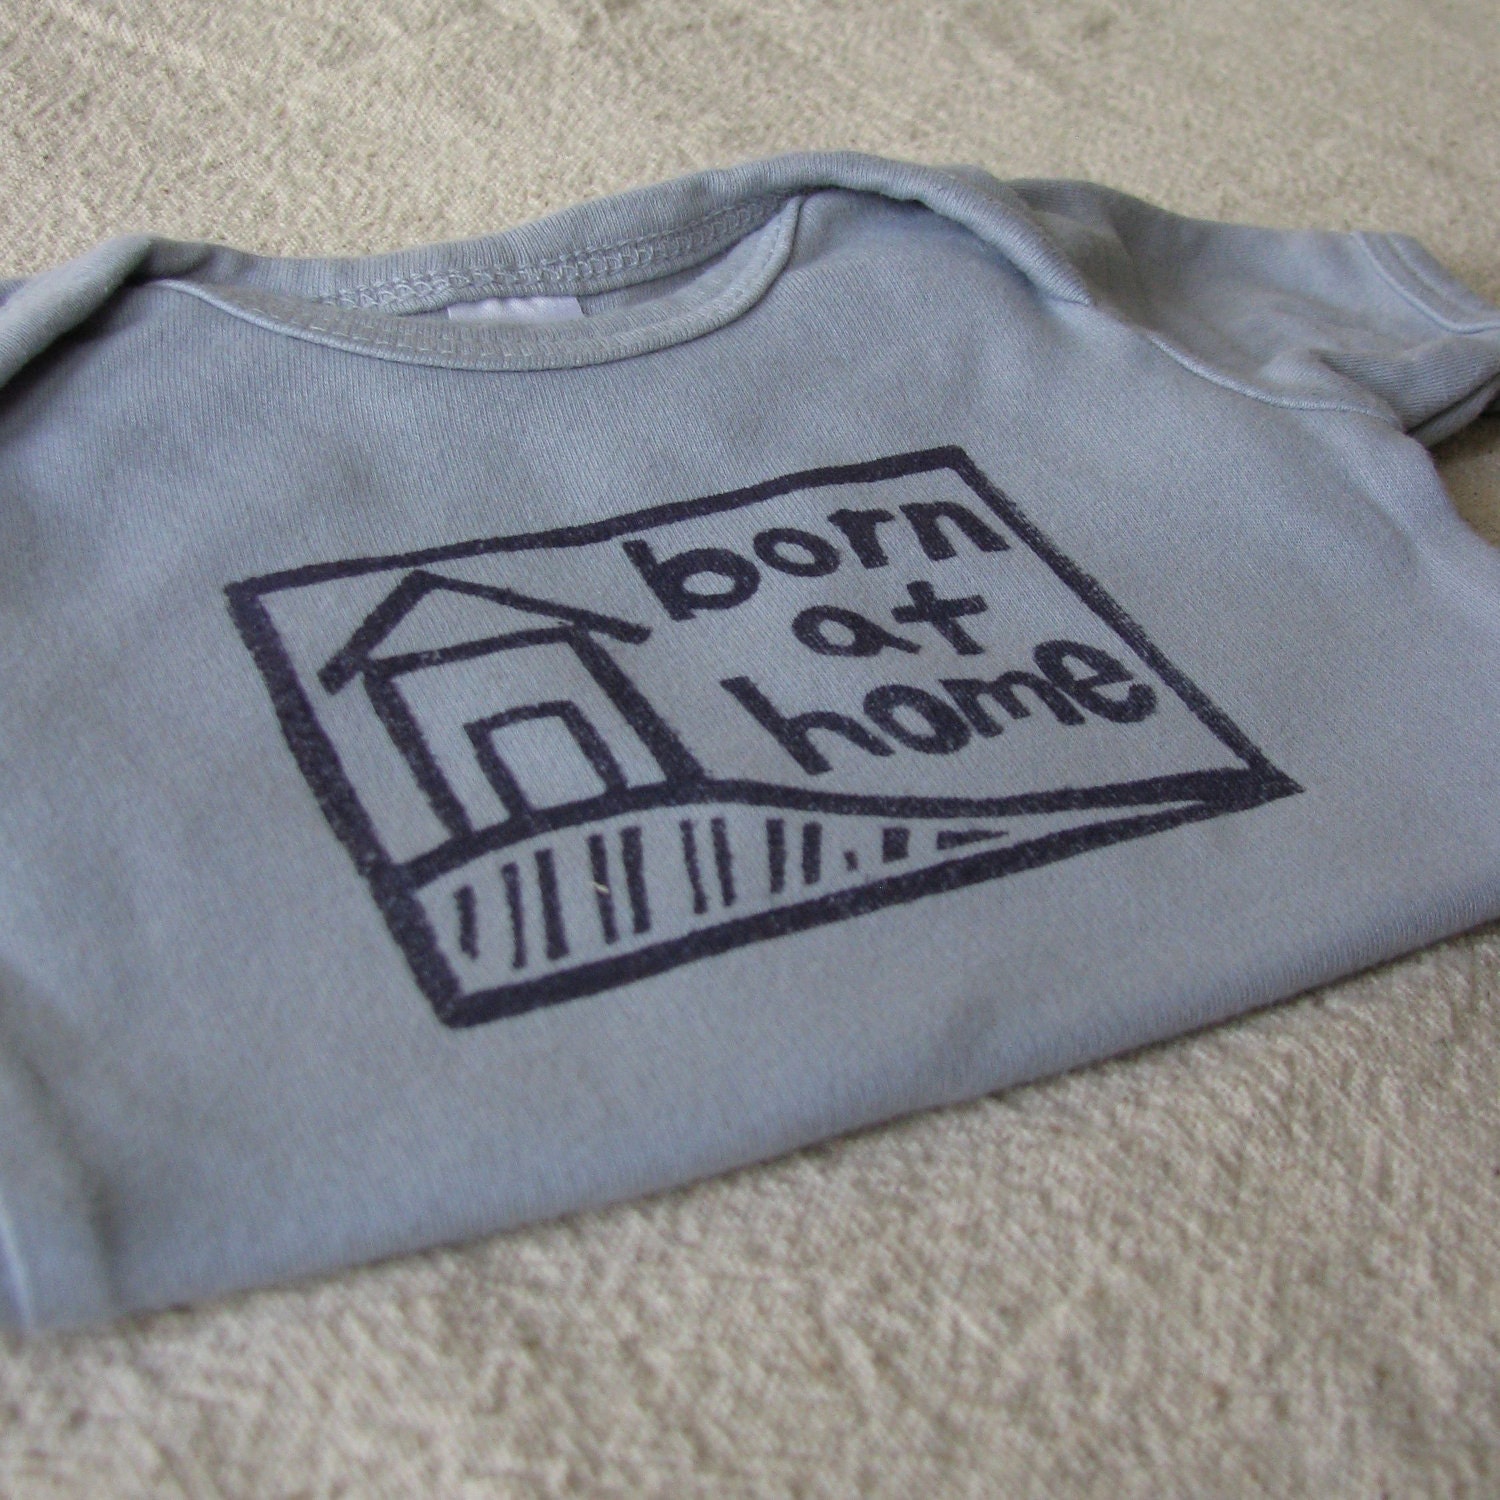 Homebirth Short Sleeve Onesie, Hand-Dyed, Hand-Printed - 0 to 3 Month Size